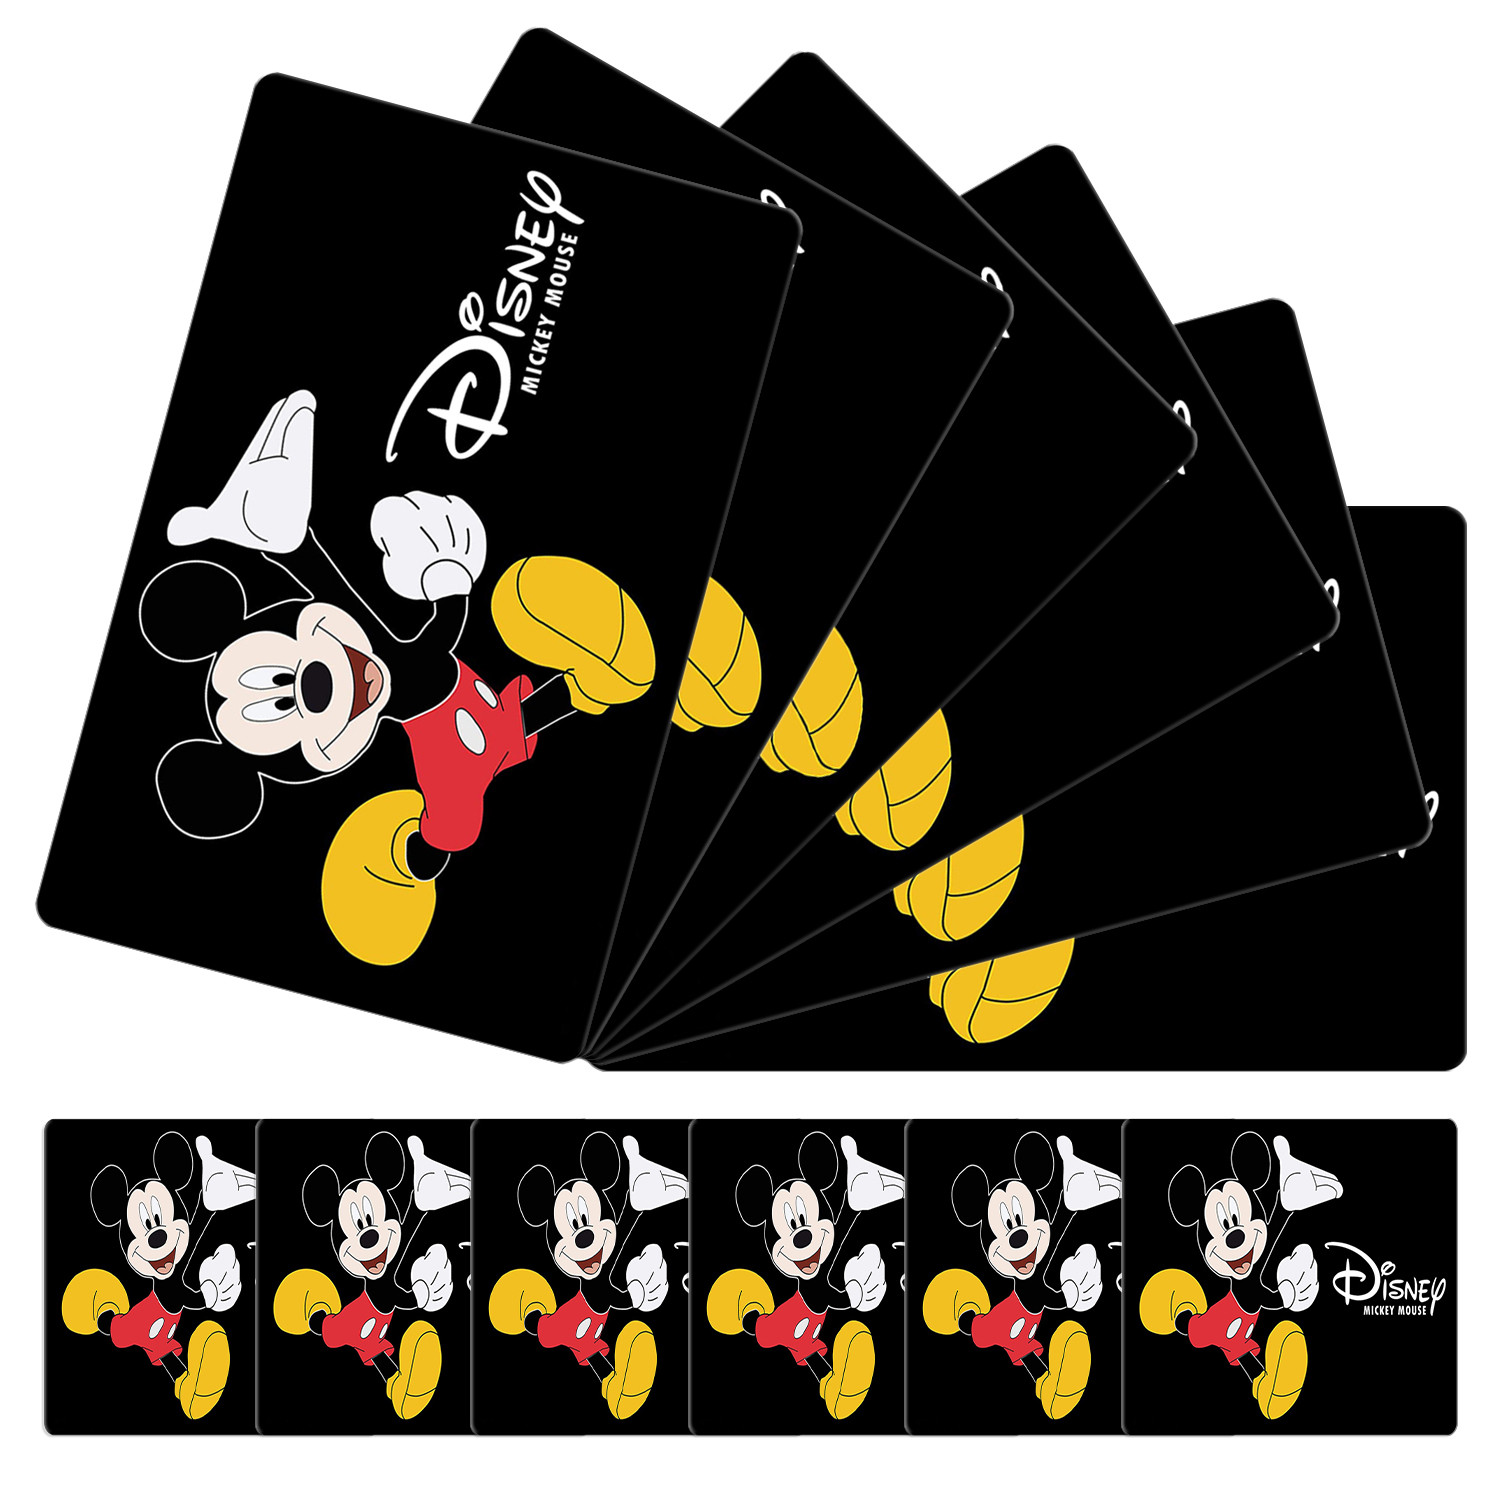 Kuber Industries Multiuses Mickey Mouse Print PVC Table Placemat With 6 Coasters for kitchen, Dining Table Set of 6 (Black)